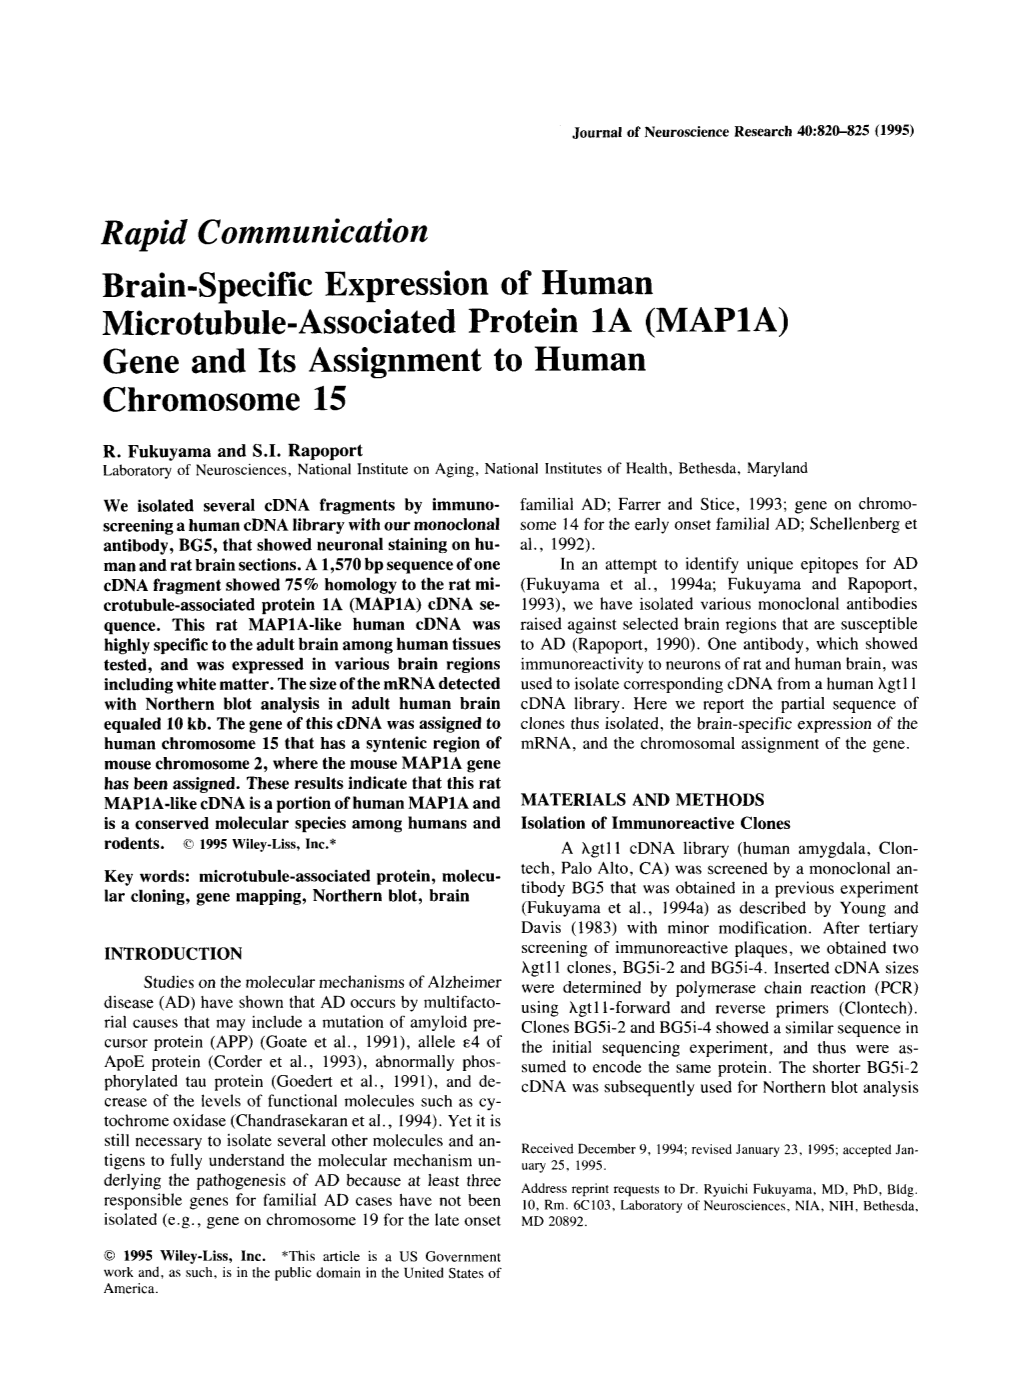 Gene and Its Assignment to Human Chromosome 15